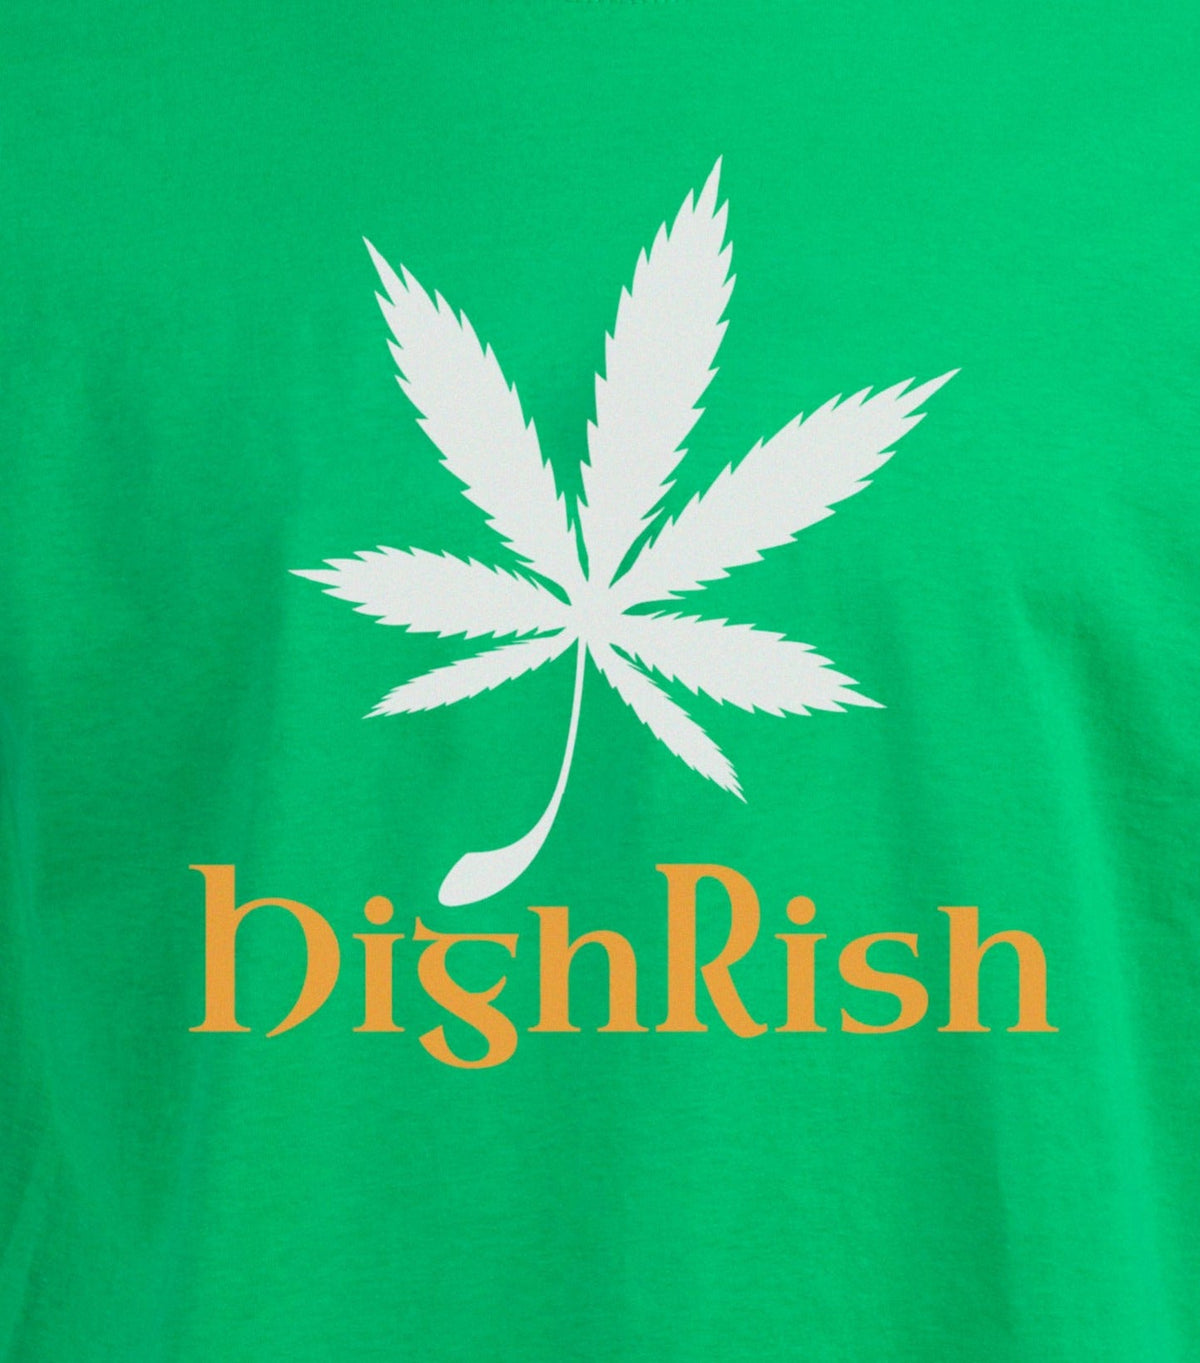 HighRish - St. Patrick's Day Sticky Green Weed Funny Stoner Party T-shirt - Men's/Unisex